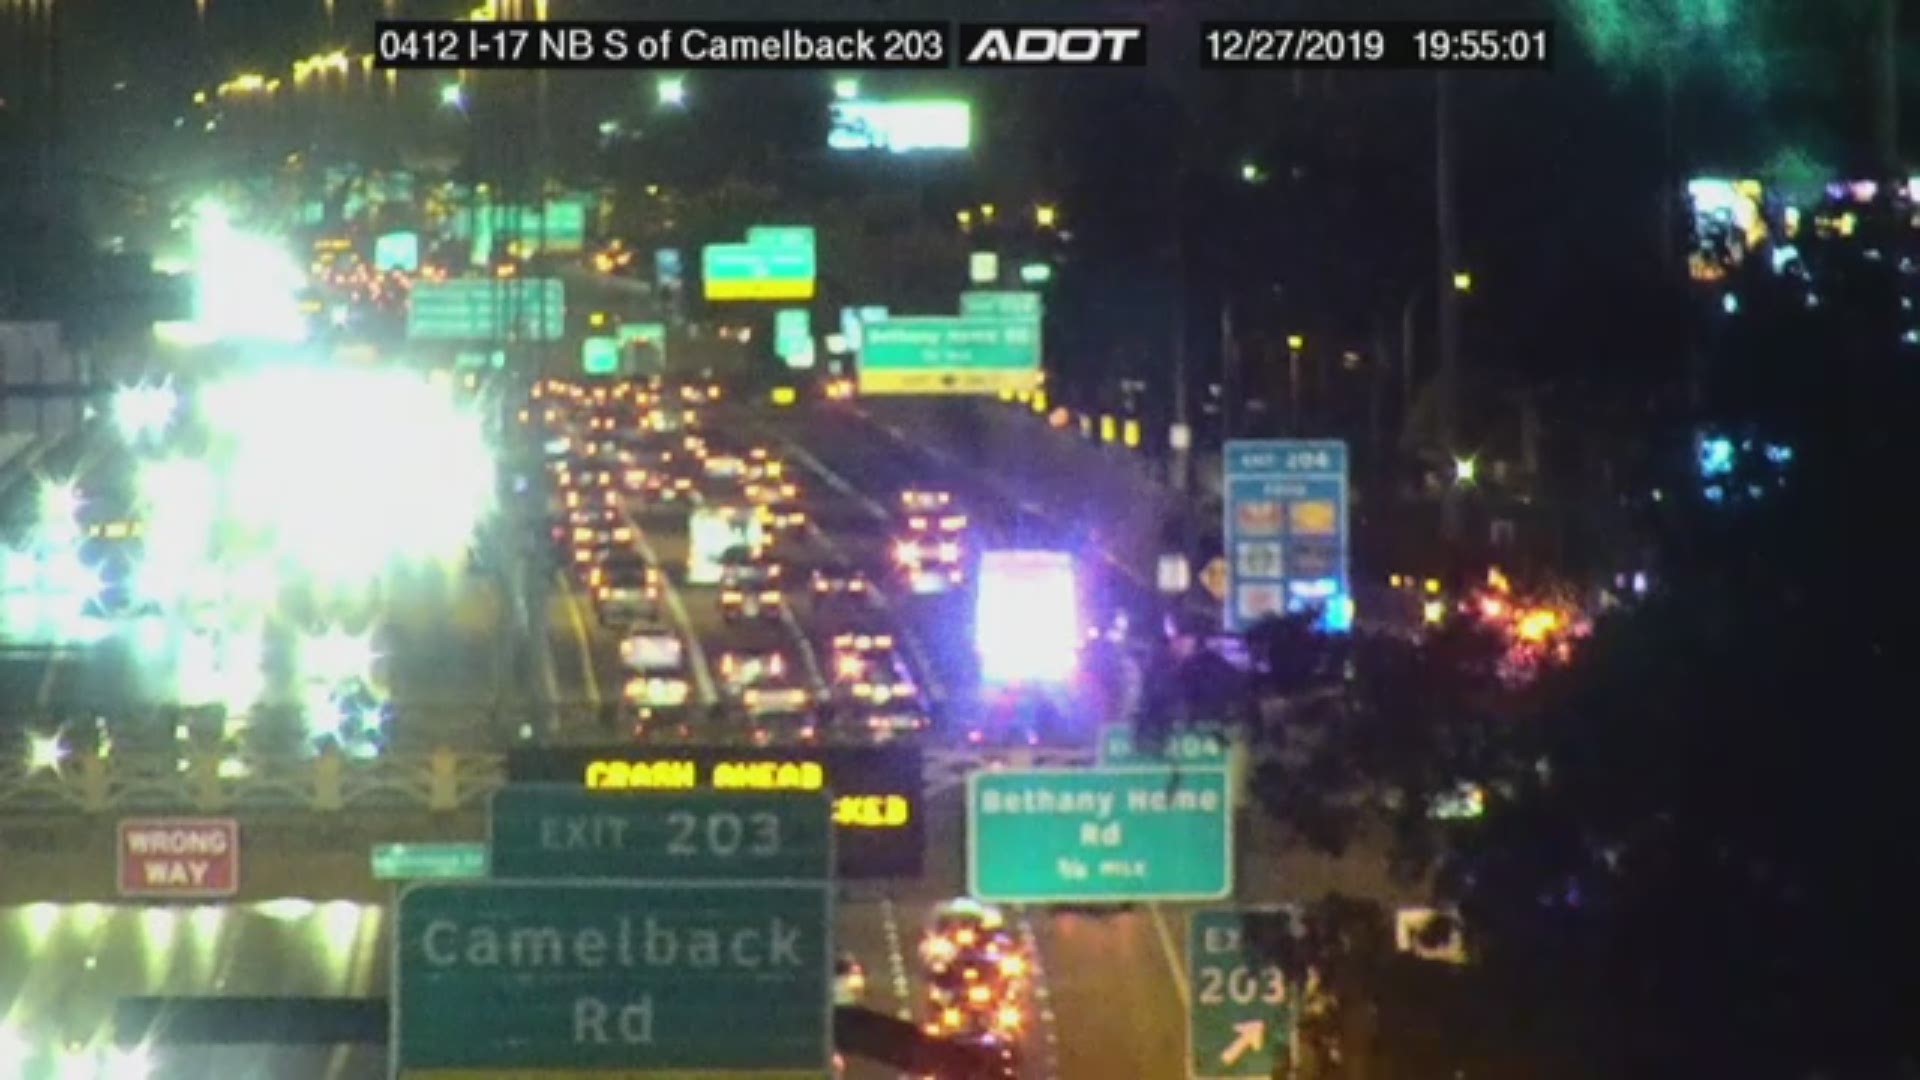 Arizona Department of Transportation video showed a fatal crash on the Interstate 17 at Camelback Road.